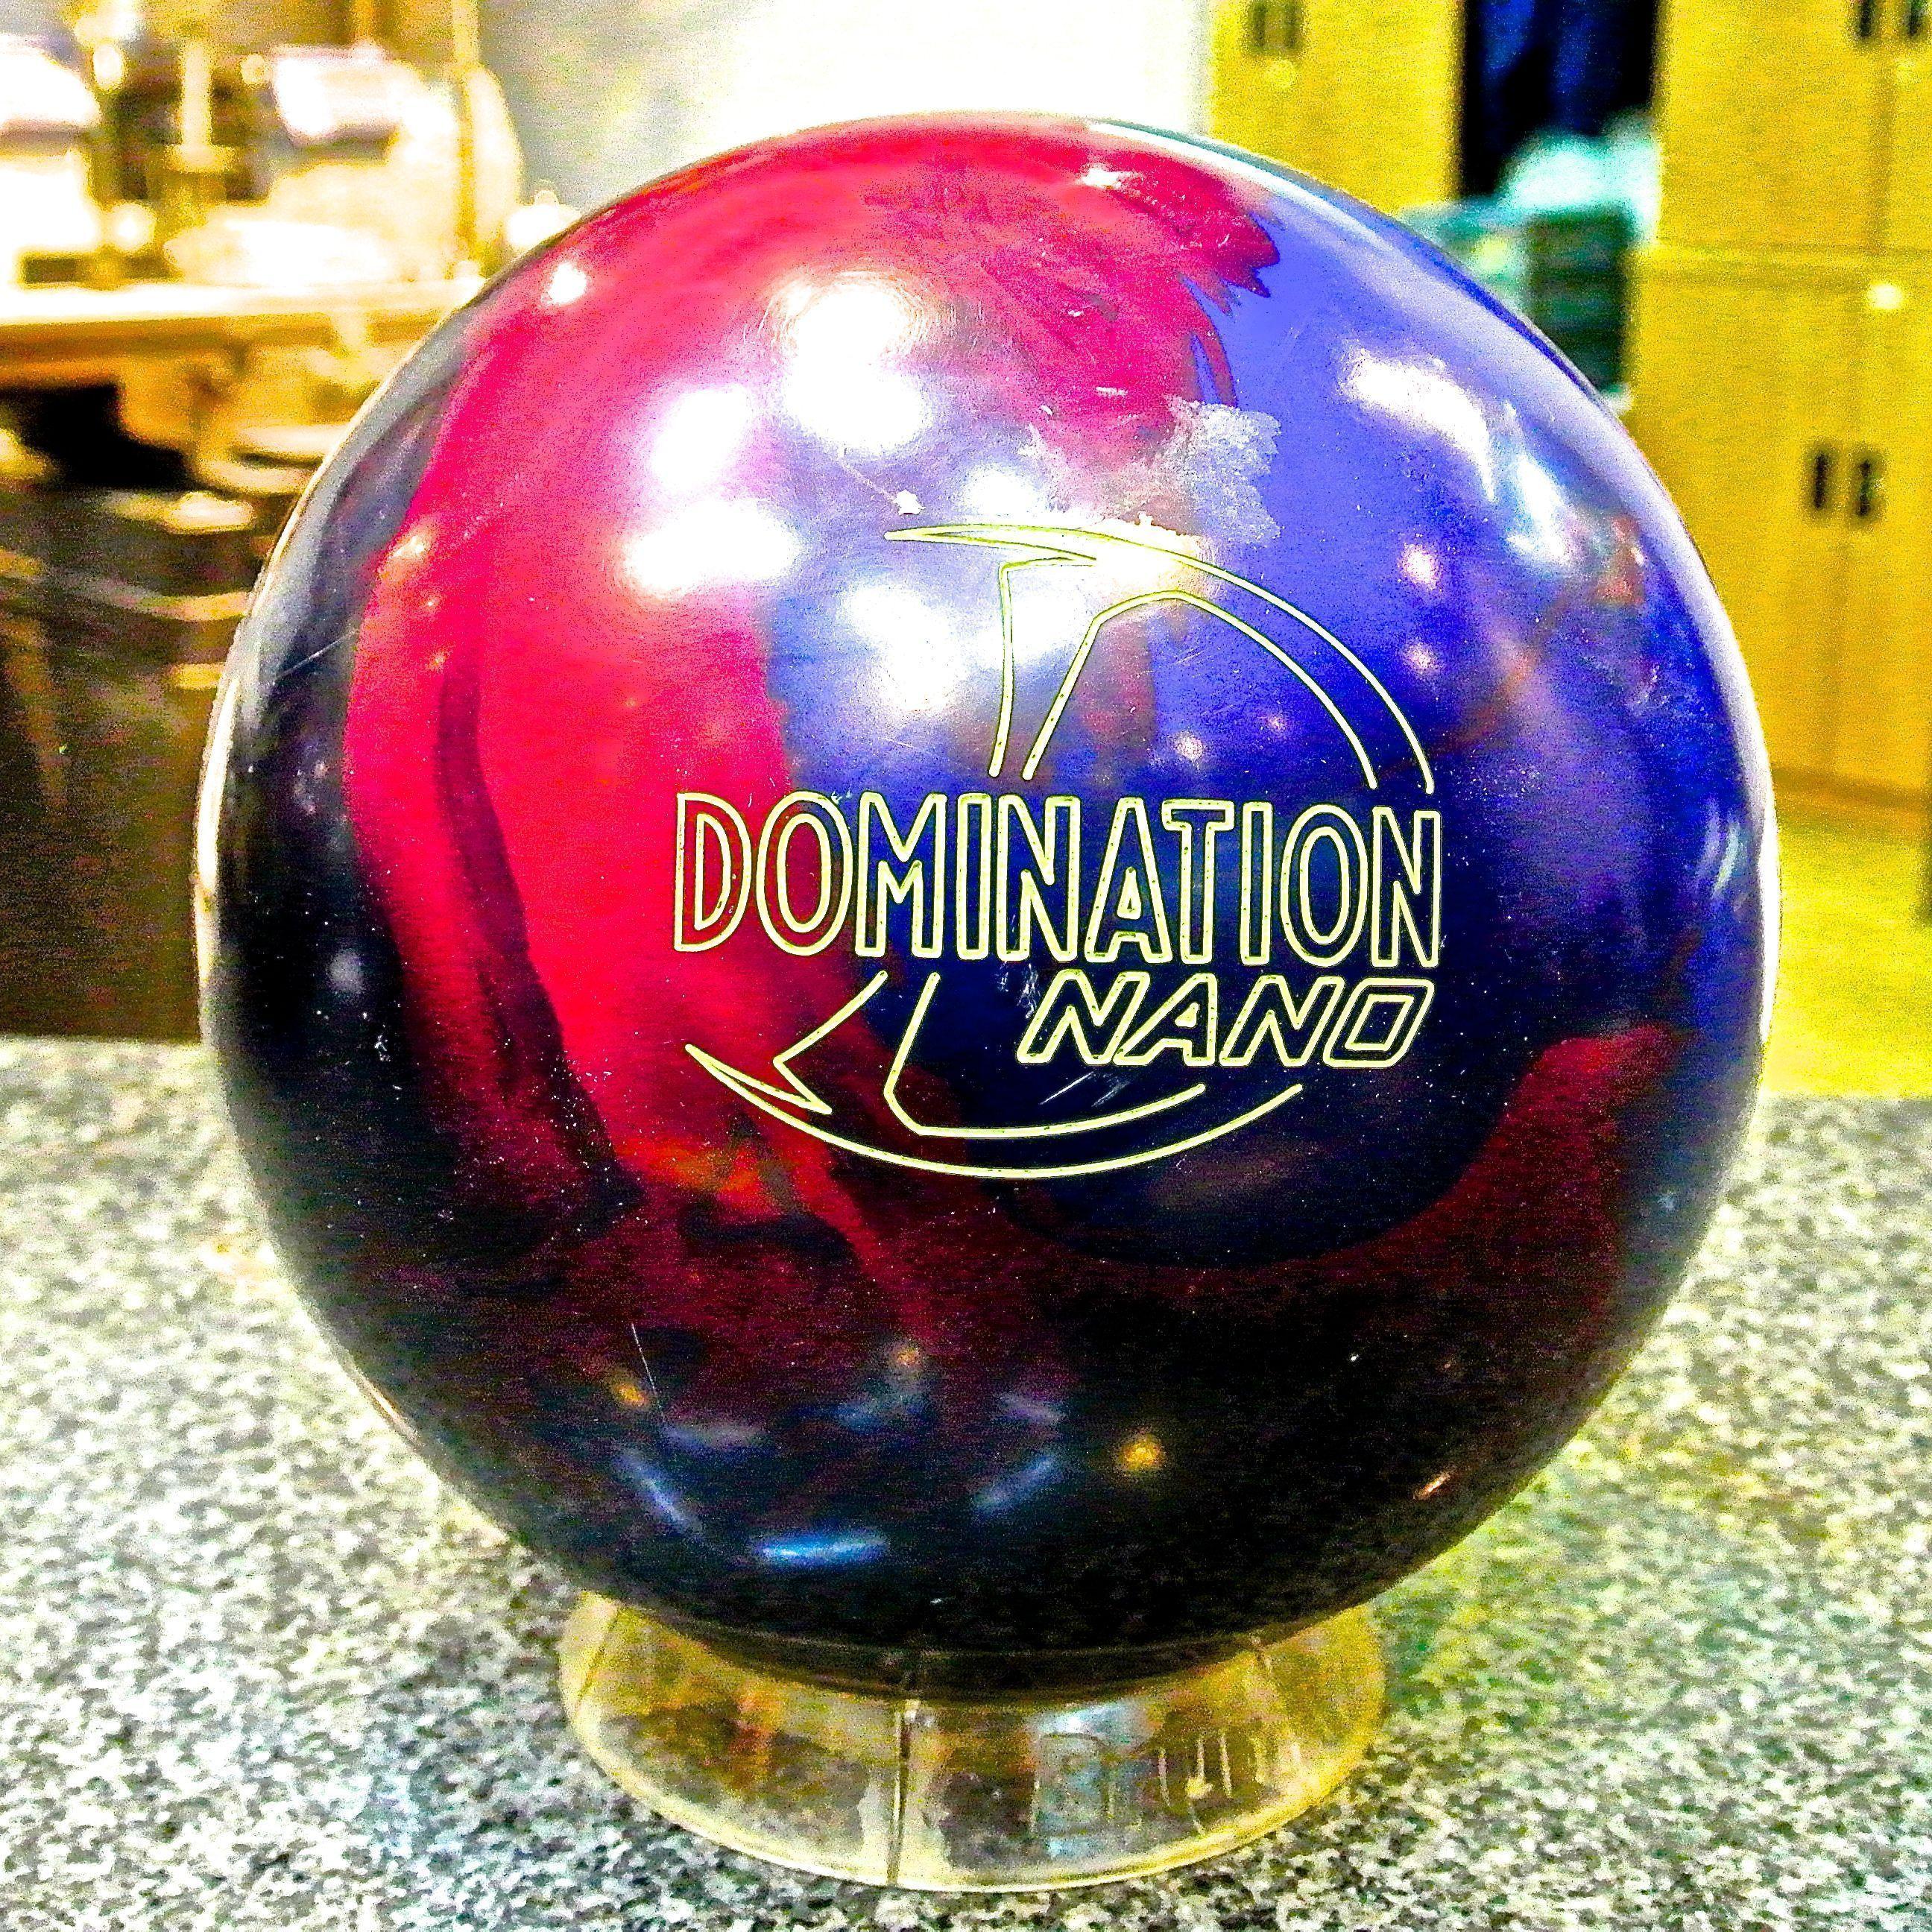 Dreads recomended domination Ball storm bowling